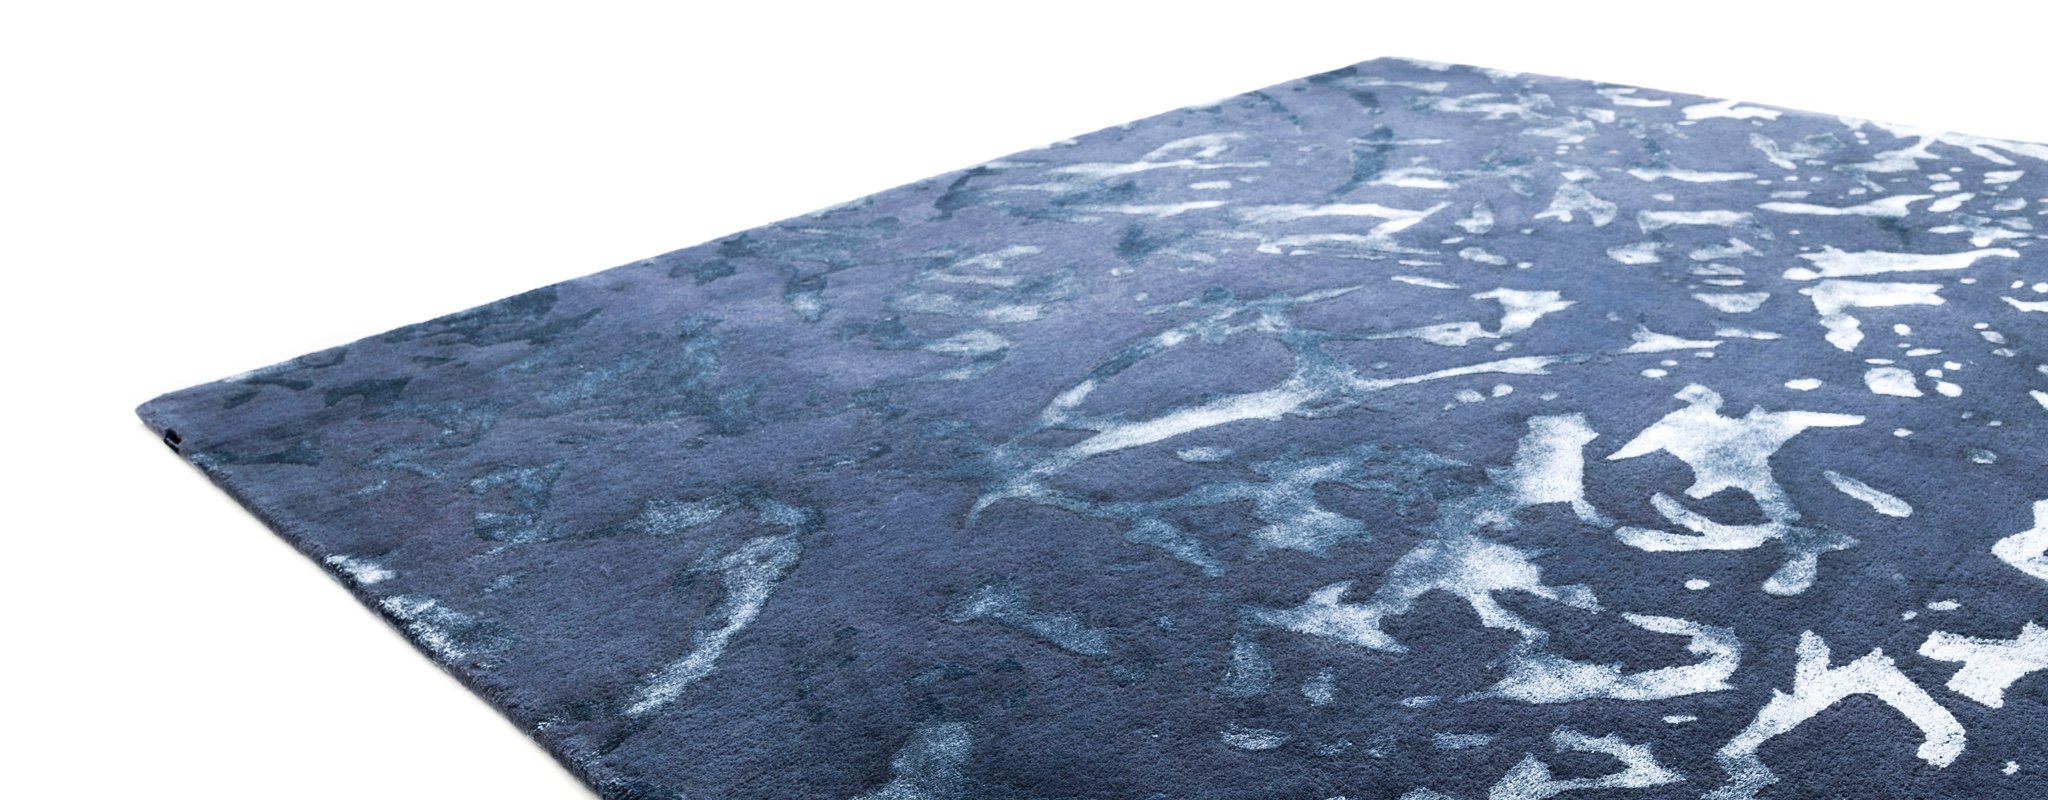 viscose pattern rug natural abstract stone design inspired by marble